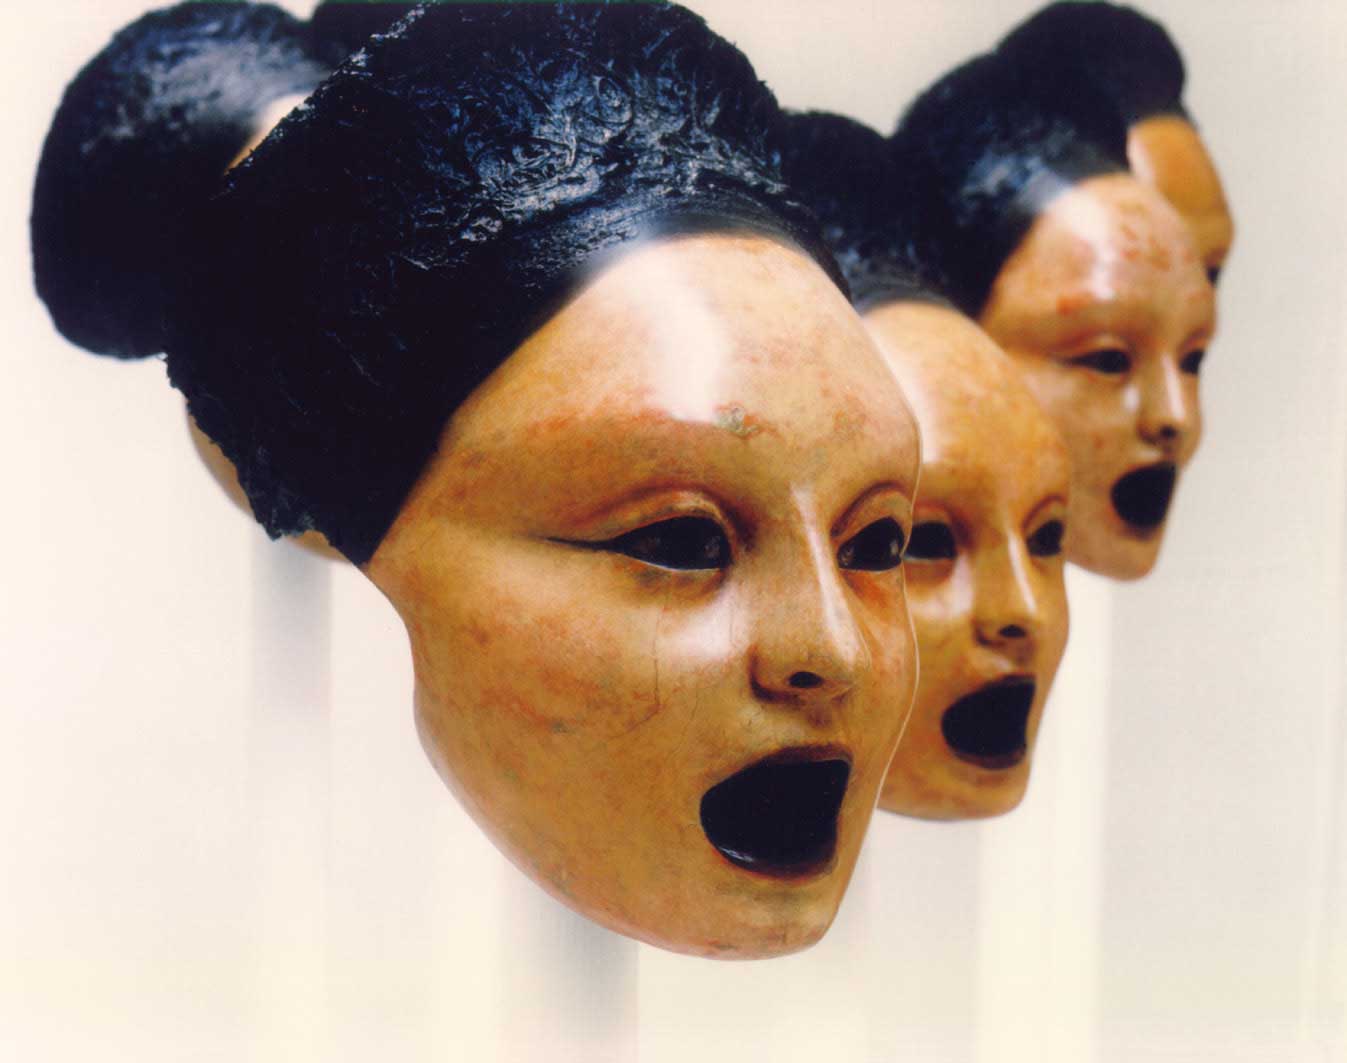 Historically accurate Ancient Greek Theatrical Masks. : r/oddlyterrifying